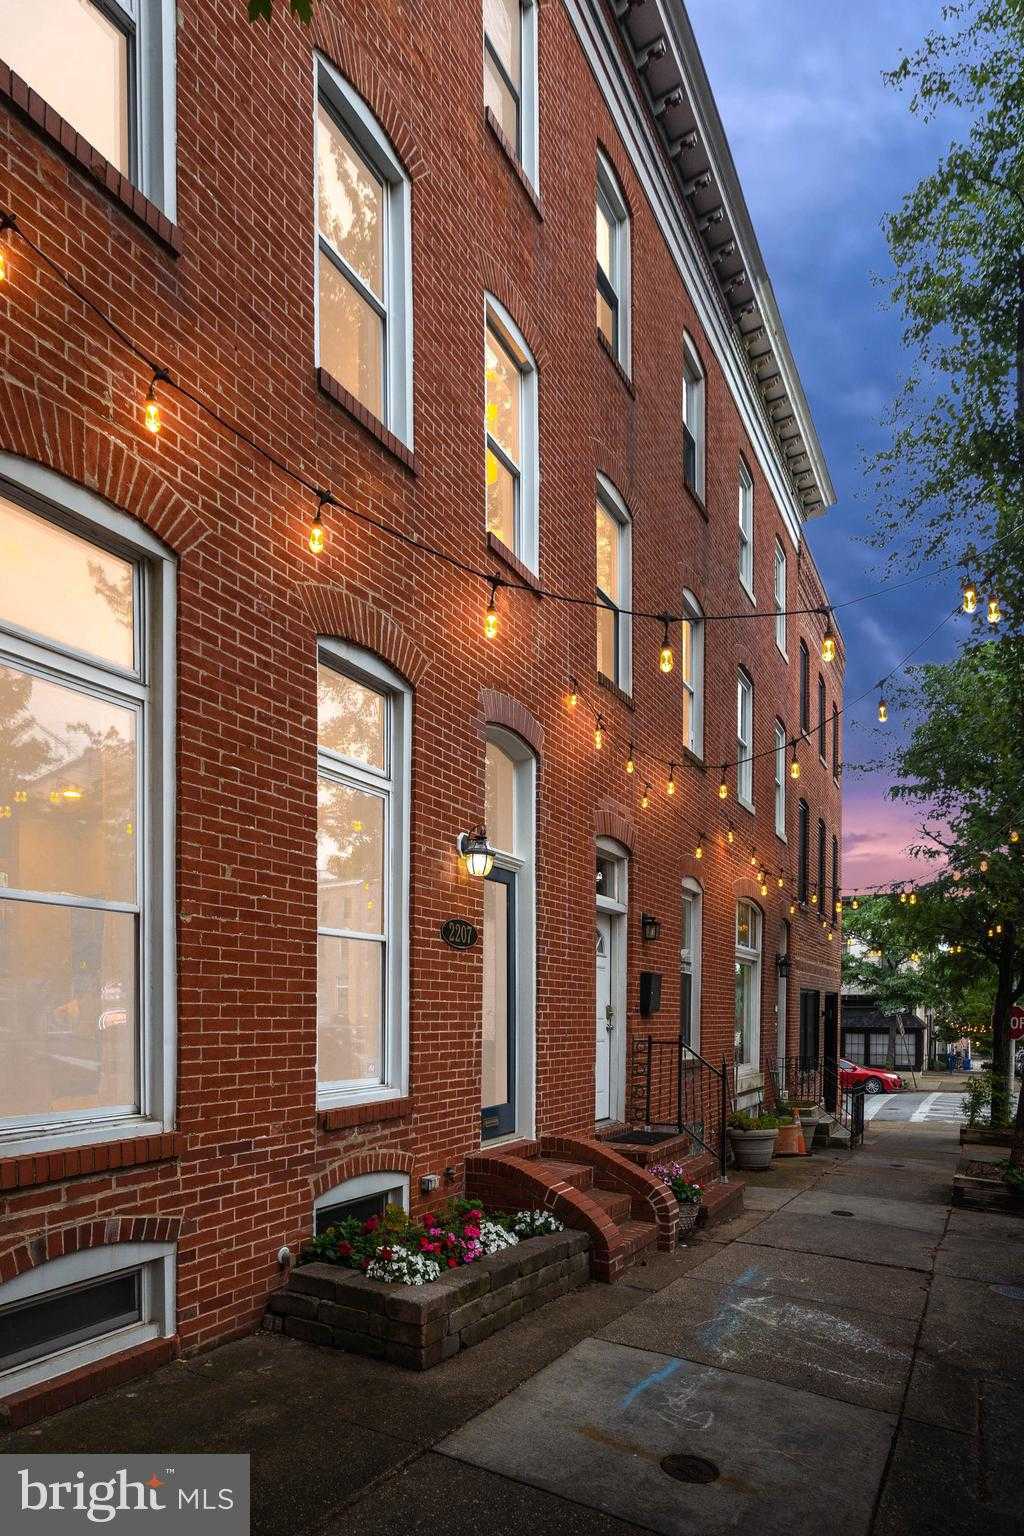 View BALTIMORE, MD 21231 townhome